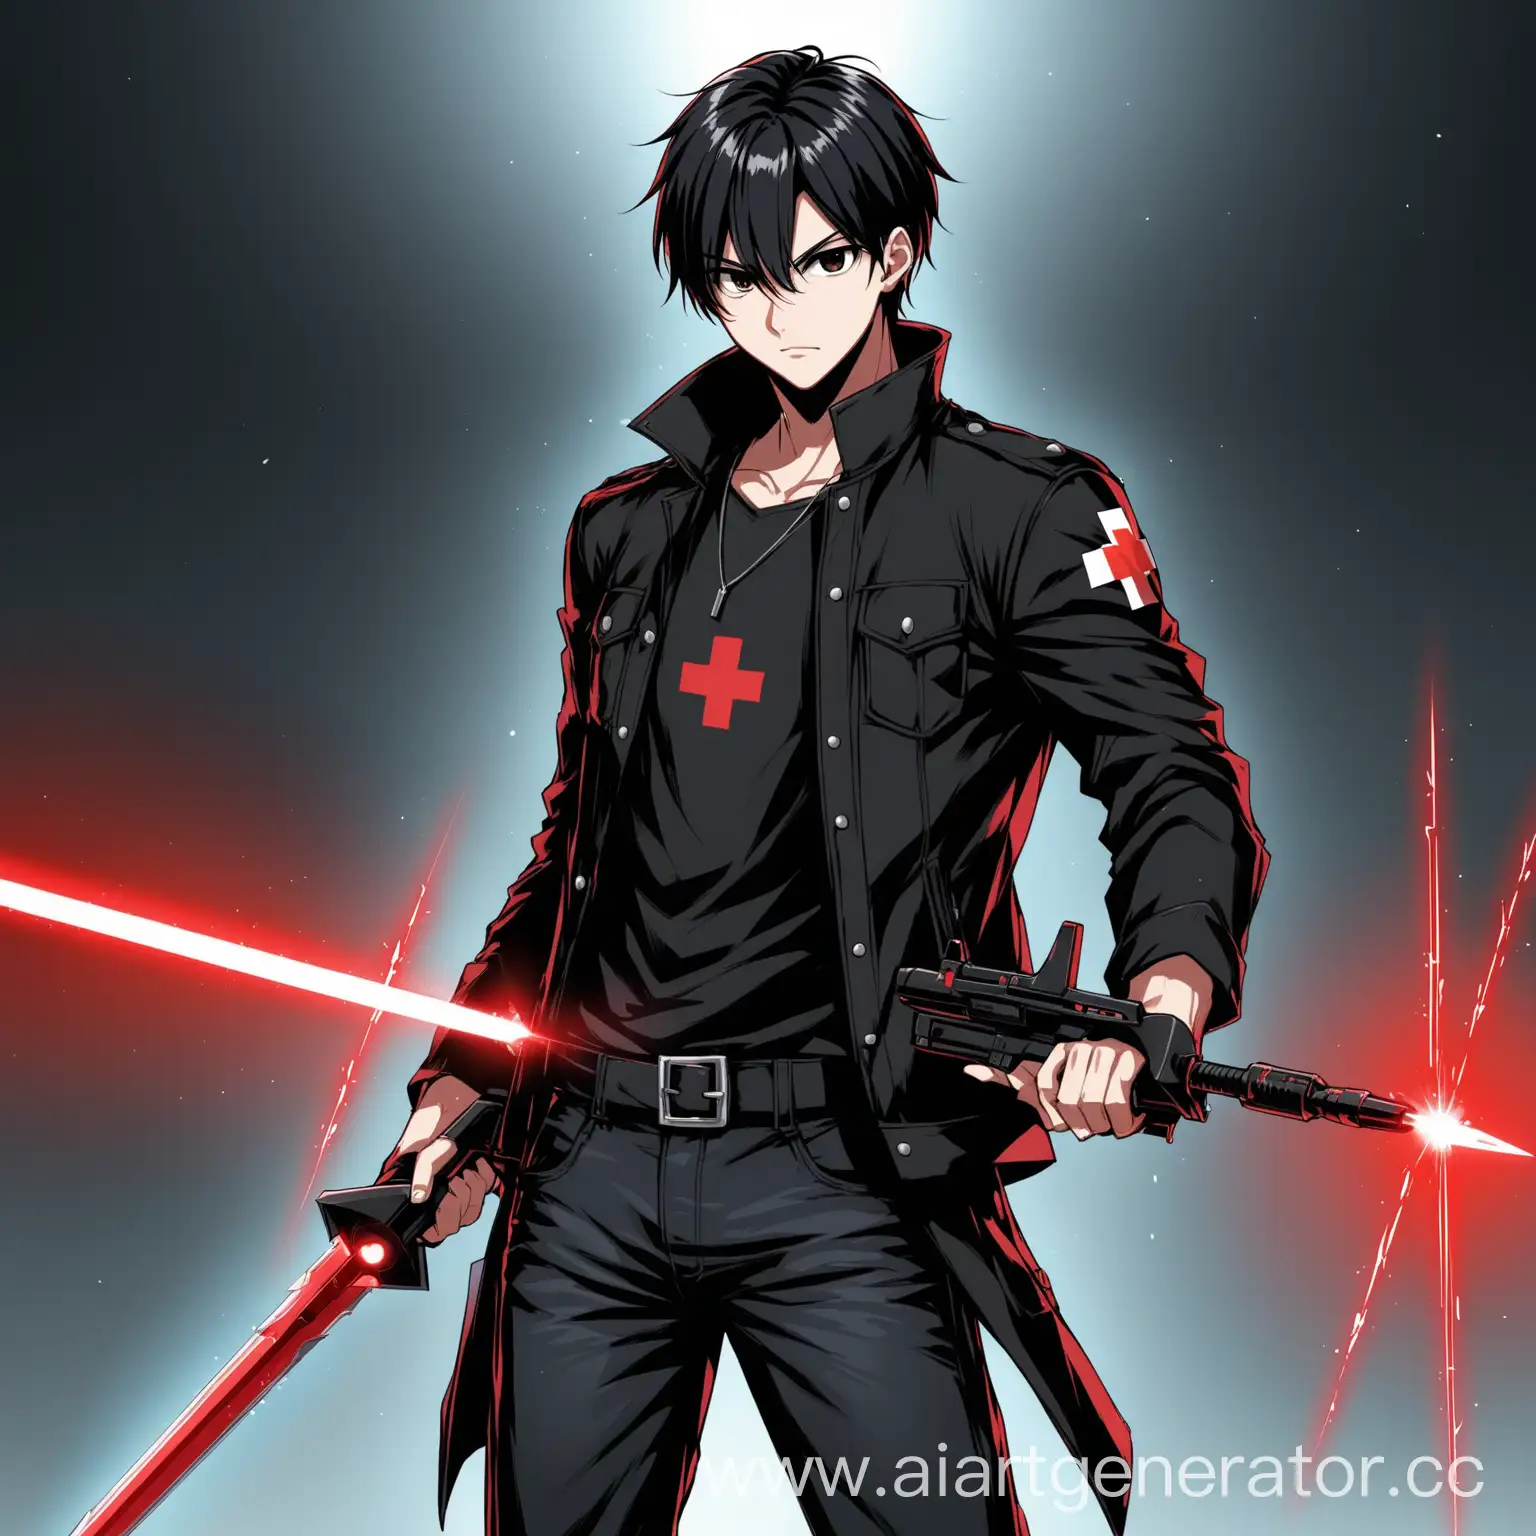 BlackHaired-Forcer-with-Red-Cross-Pupils-and-Laser-Spear